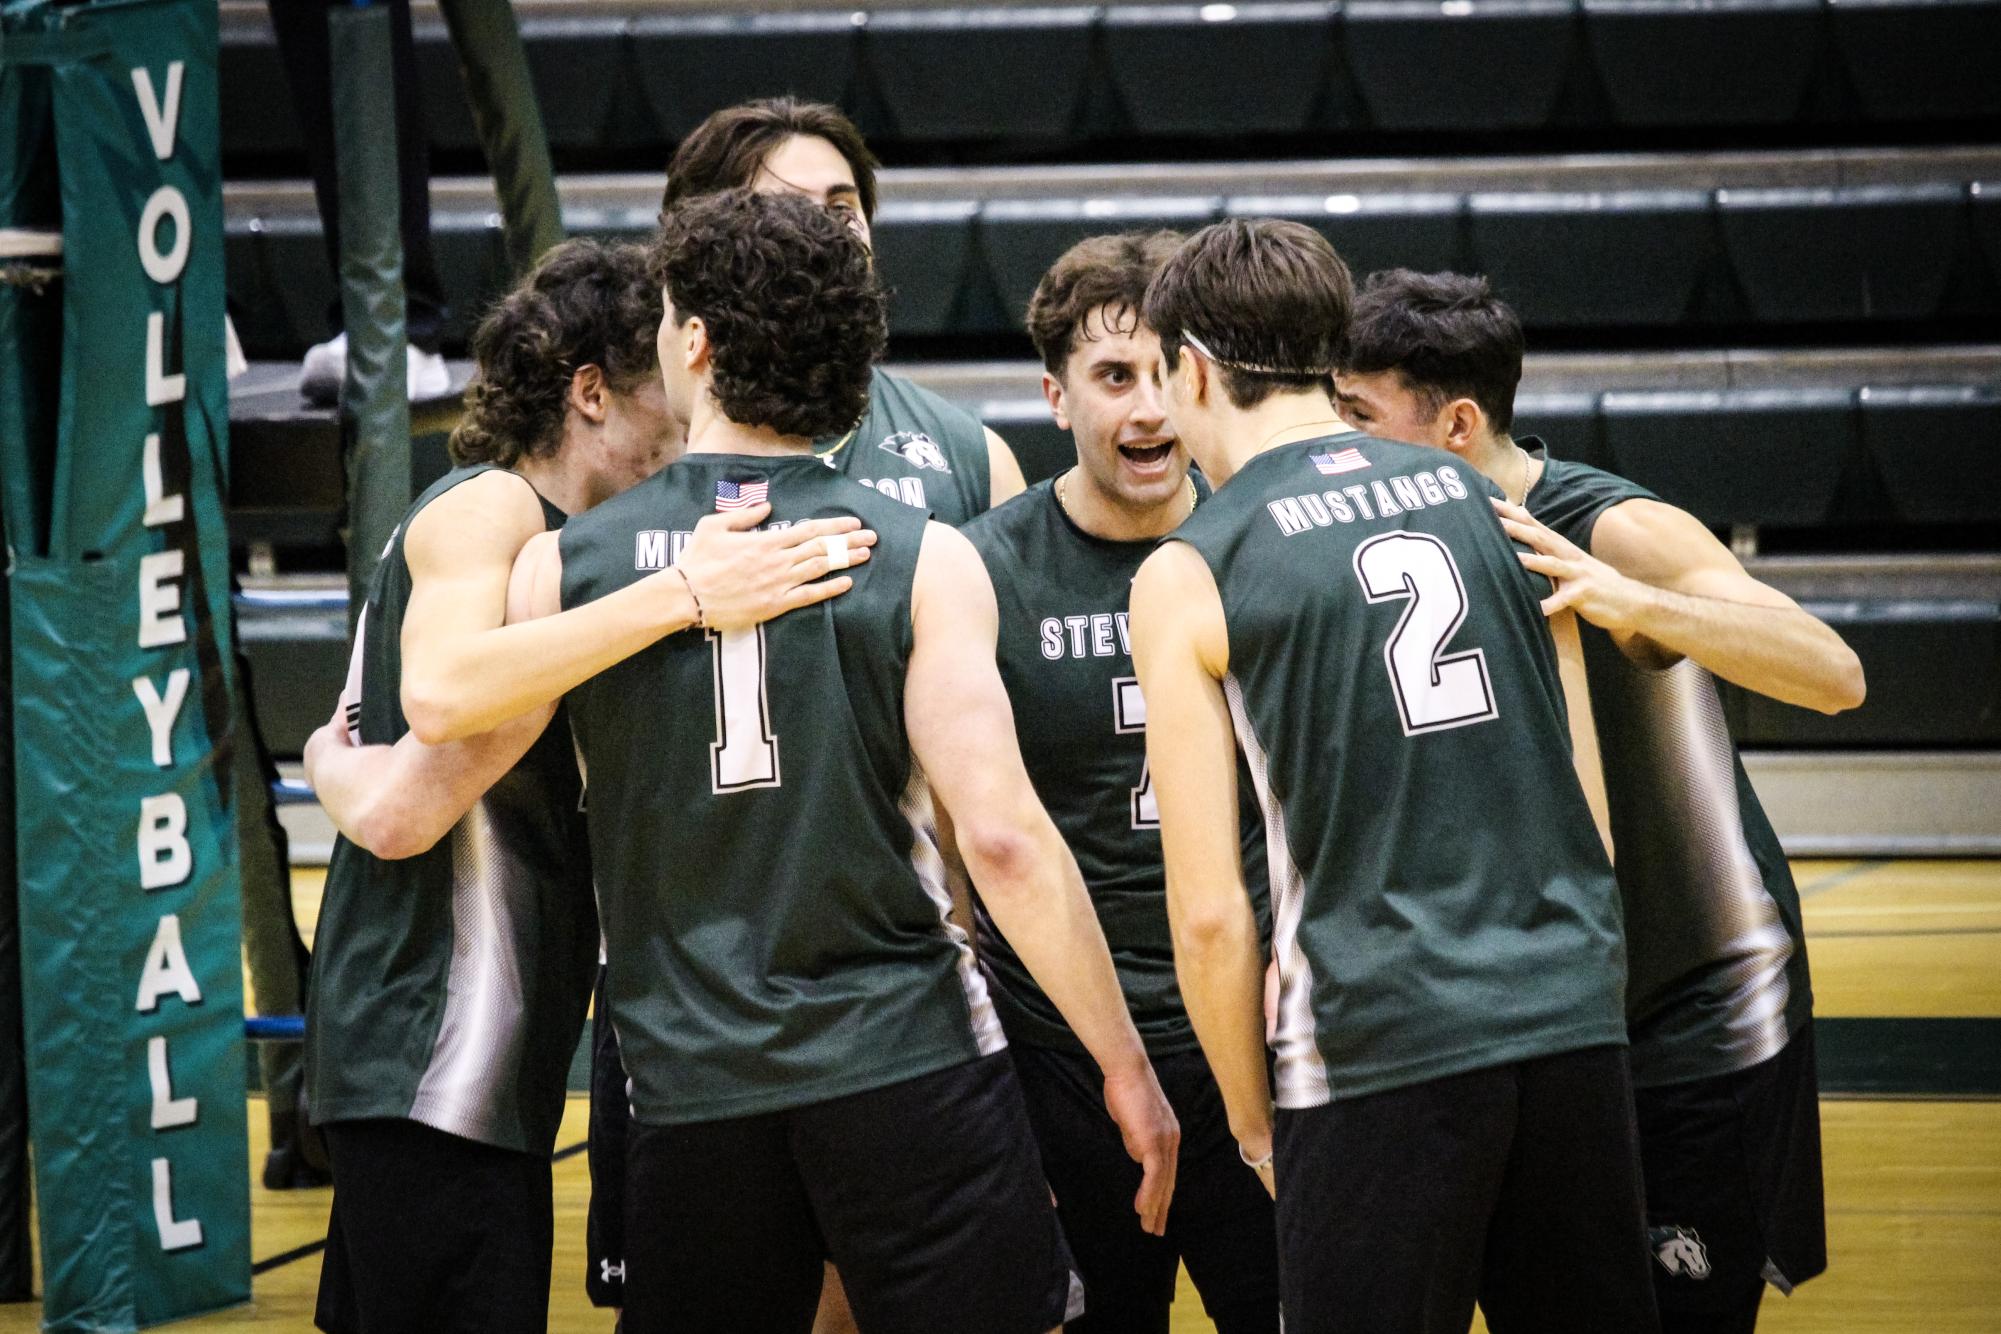 Stevenson mens volleyball earning their first win of the season over Roanoke College